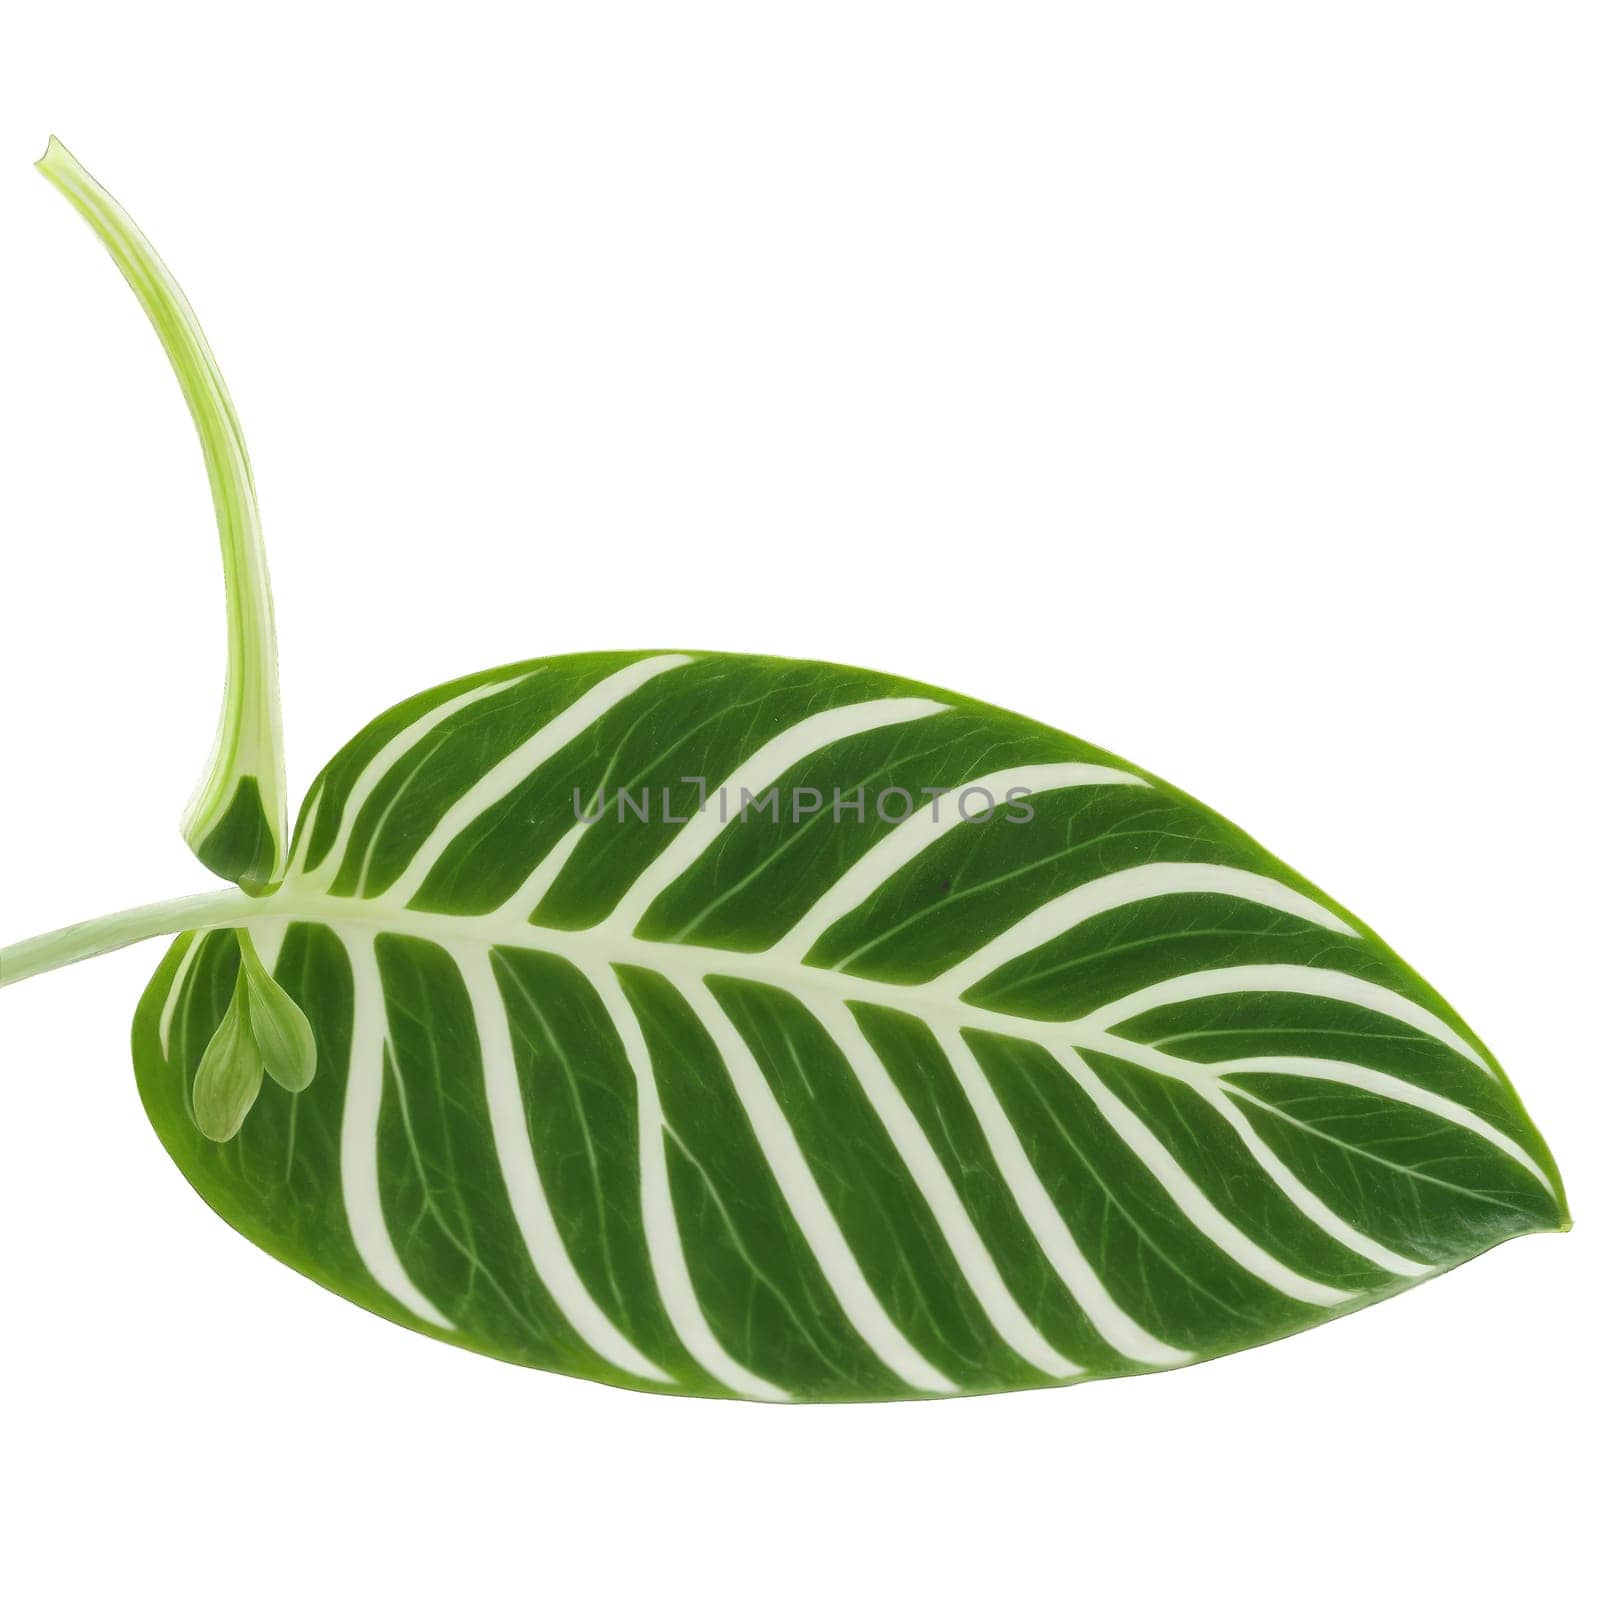 Stromanthe leaf oval leaf with striking green and white variegation and prominent veins Stromanthe sanguinea by Matiunina